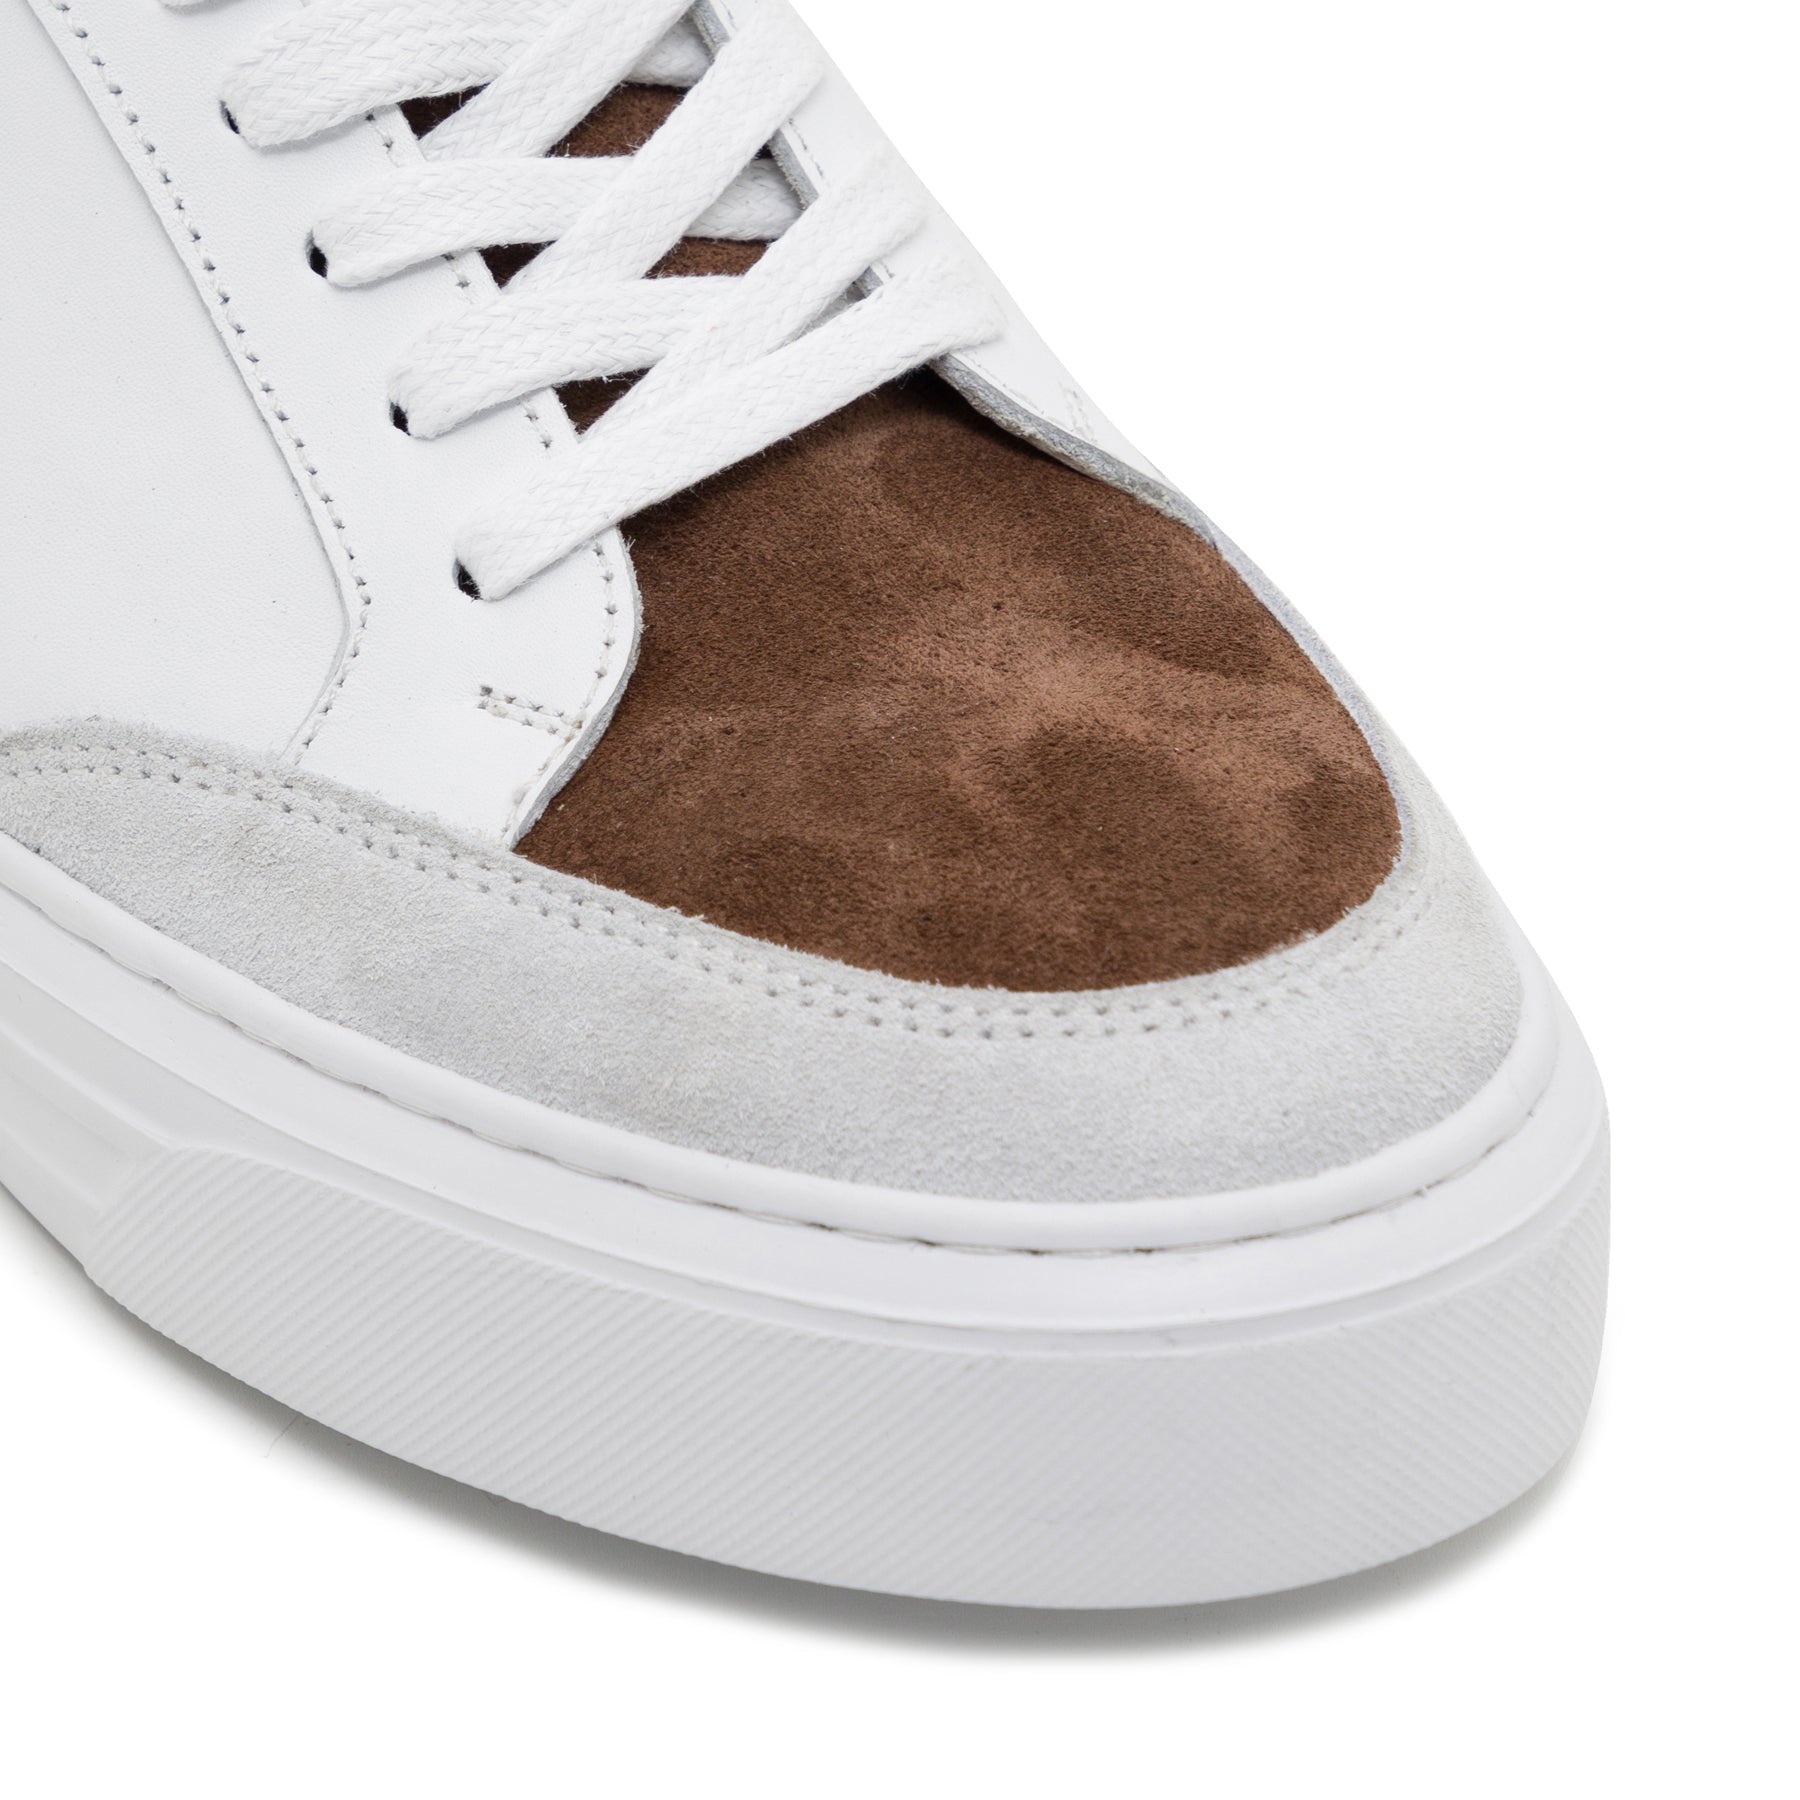 Morty White Suede Sneaker